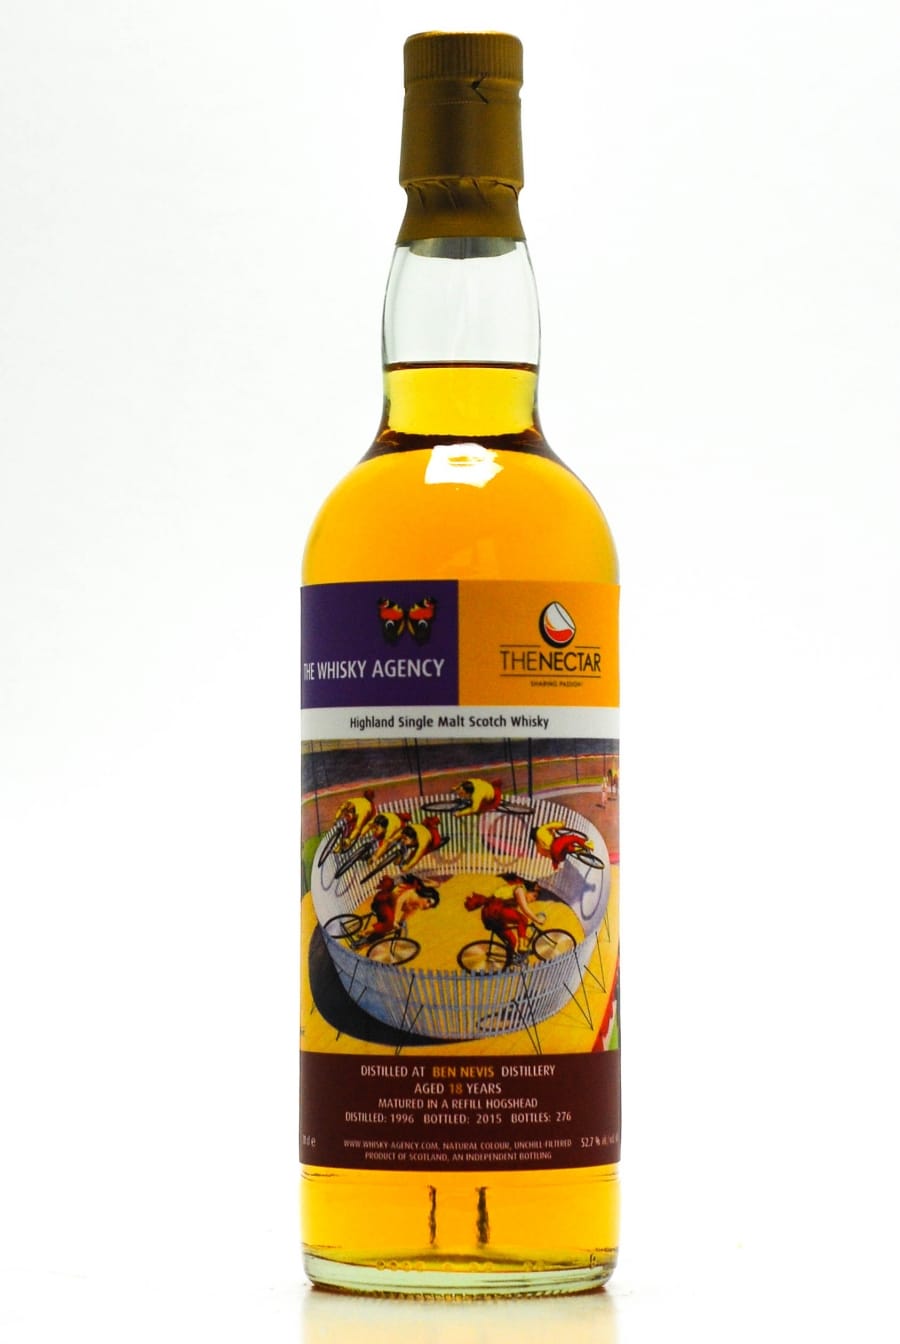 Ben Nevis - Ben Nevis 18 Years Old The Whisky Agency Circus botteling Serie Joint bottling with The Nectar 1 Of 276 Bottles 52.7% 1996 Perfect